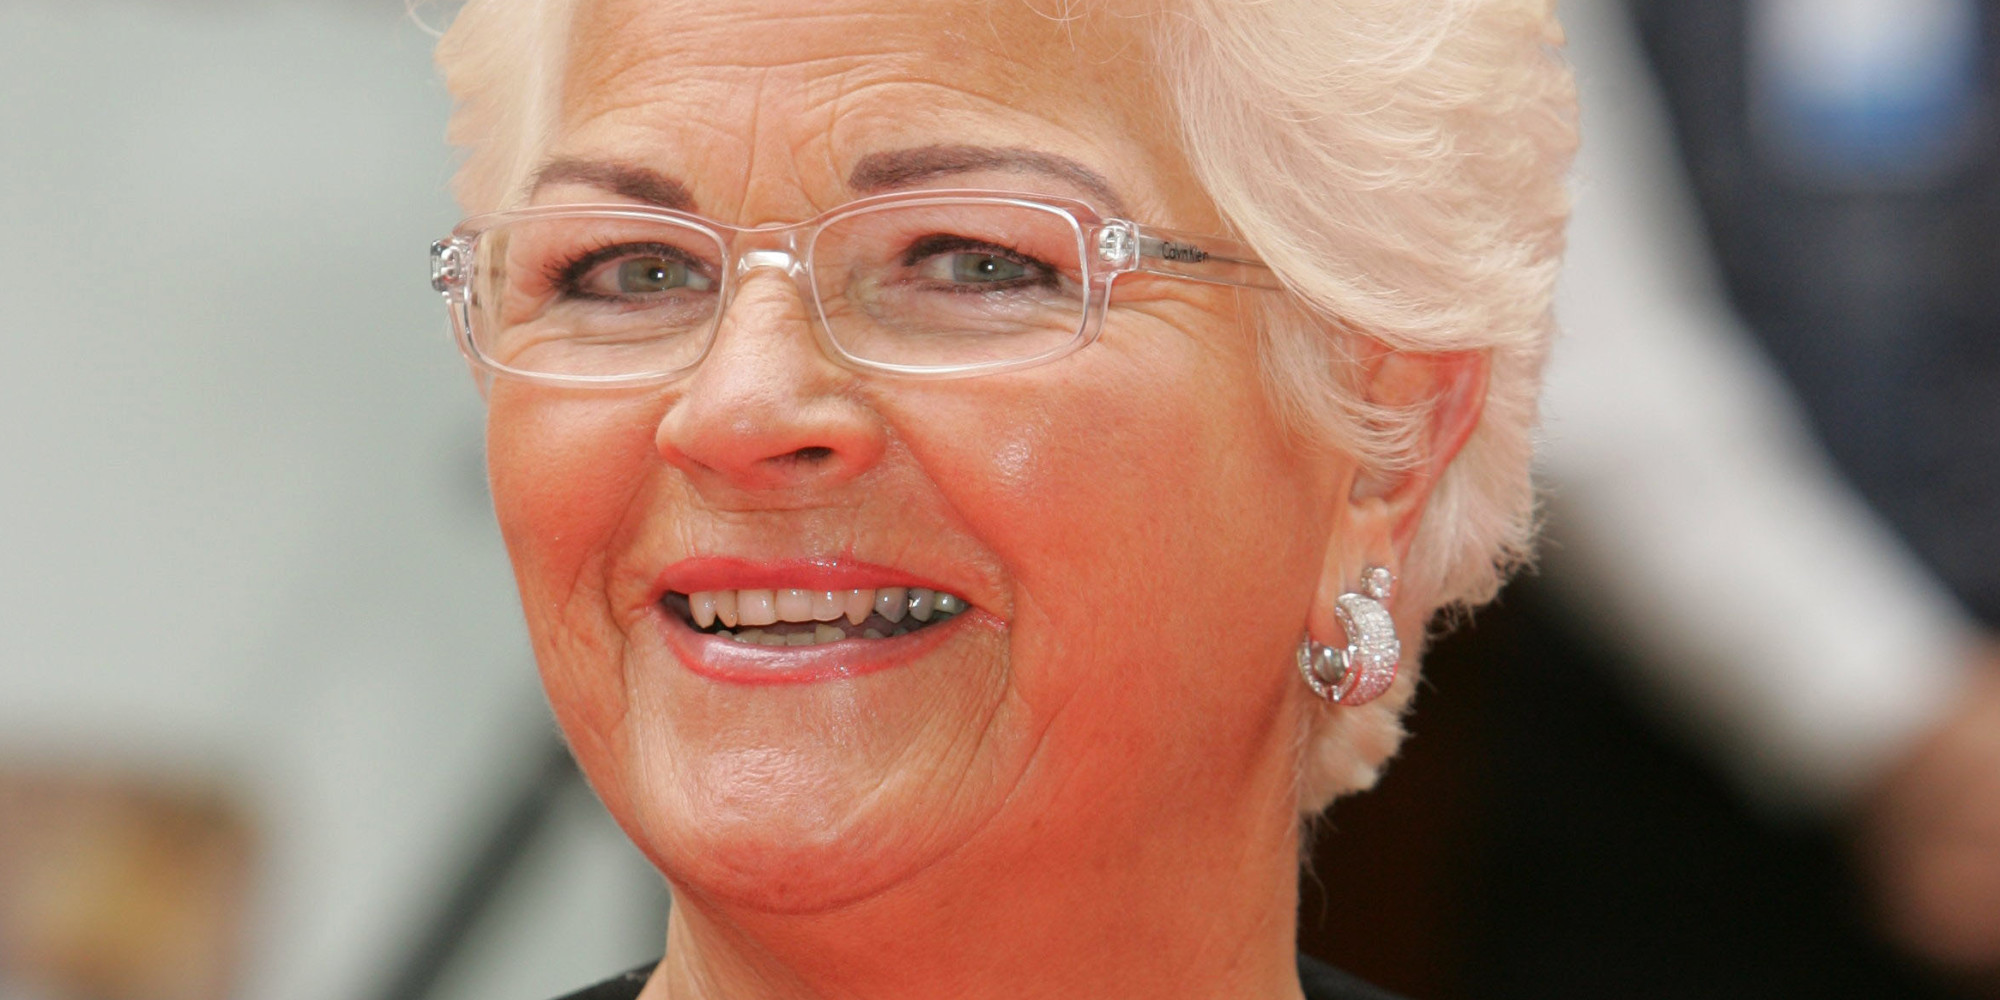 Pam St Clement forced to postpone surgery after cutting 